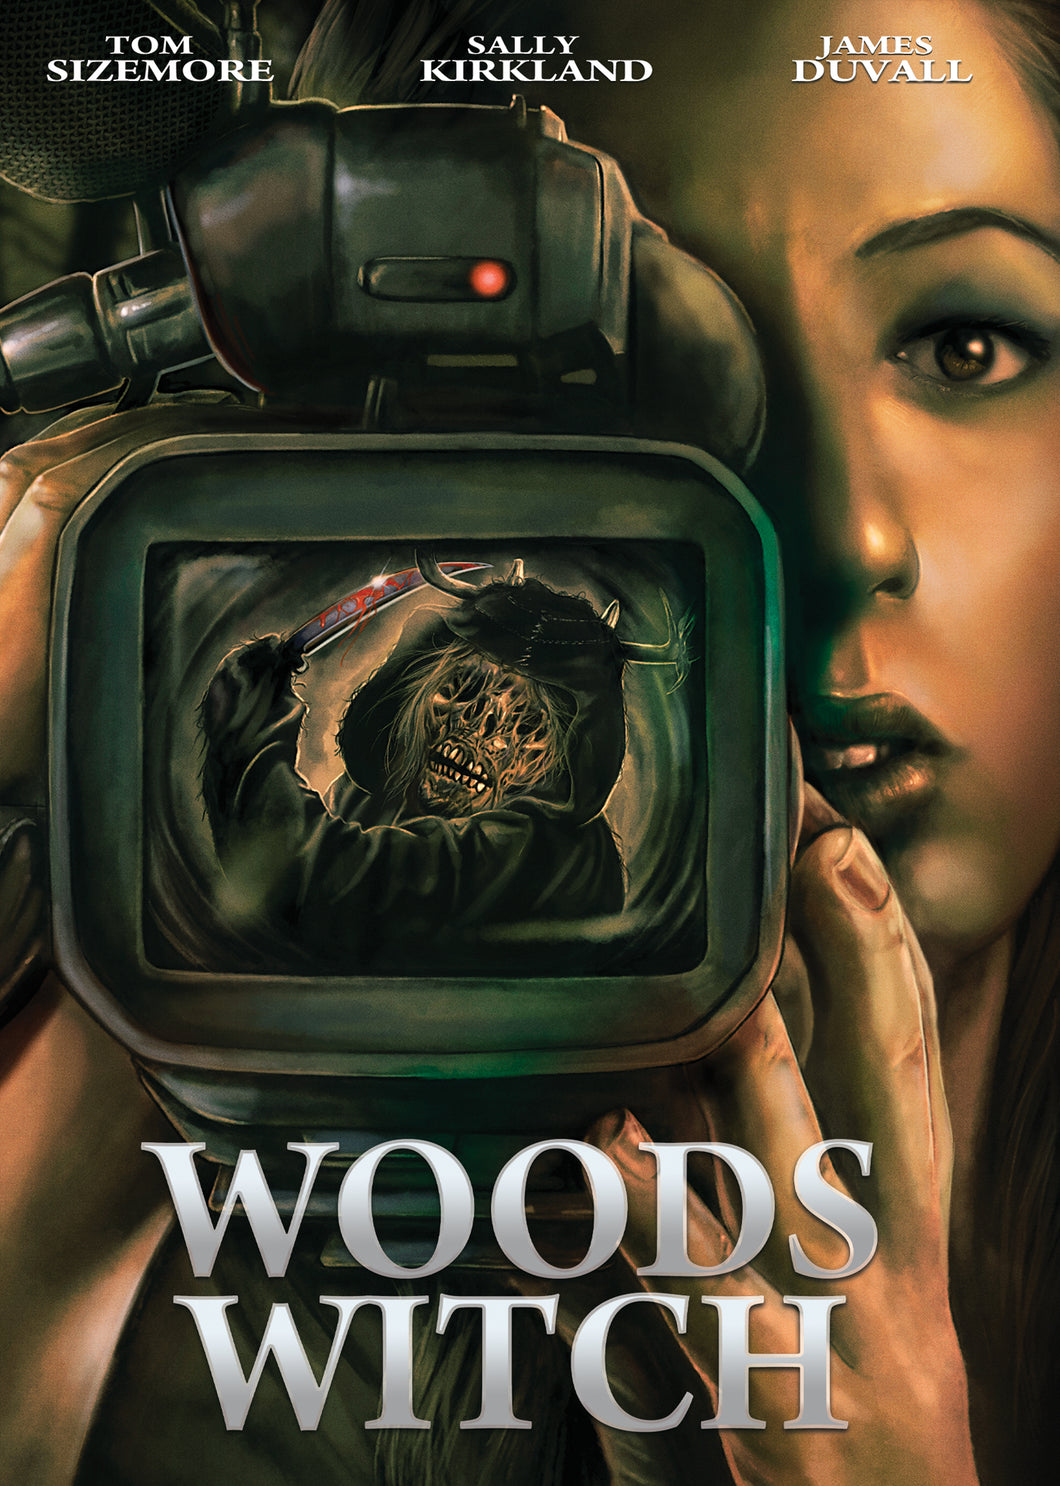 Woods Witch DVD